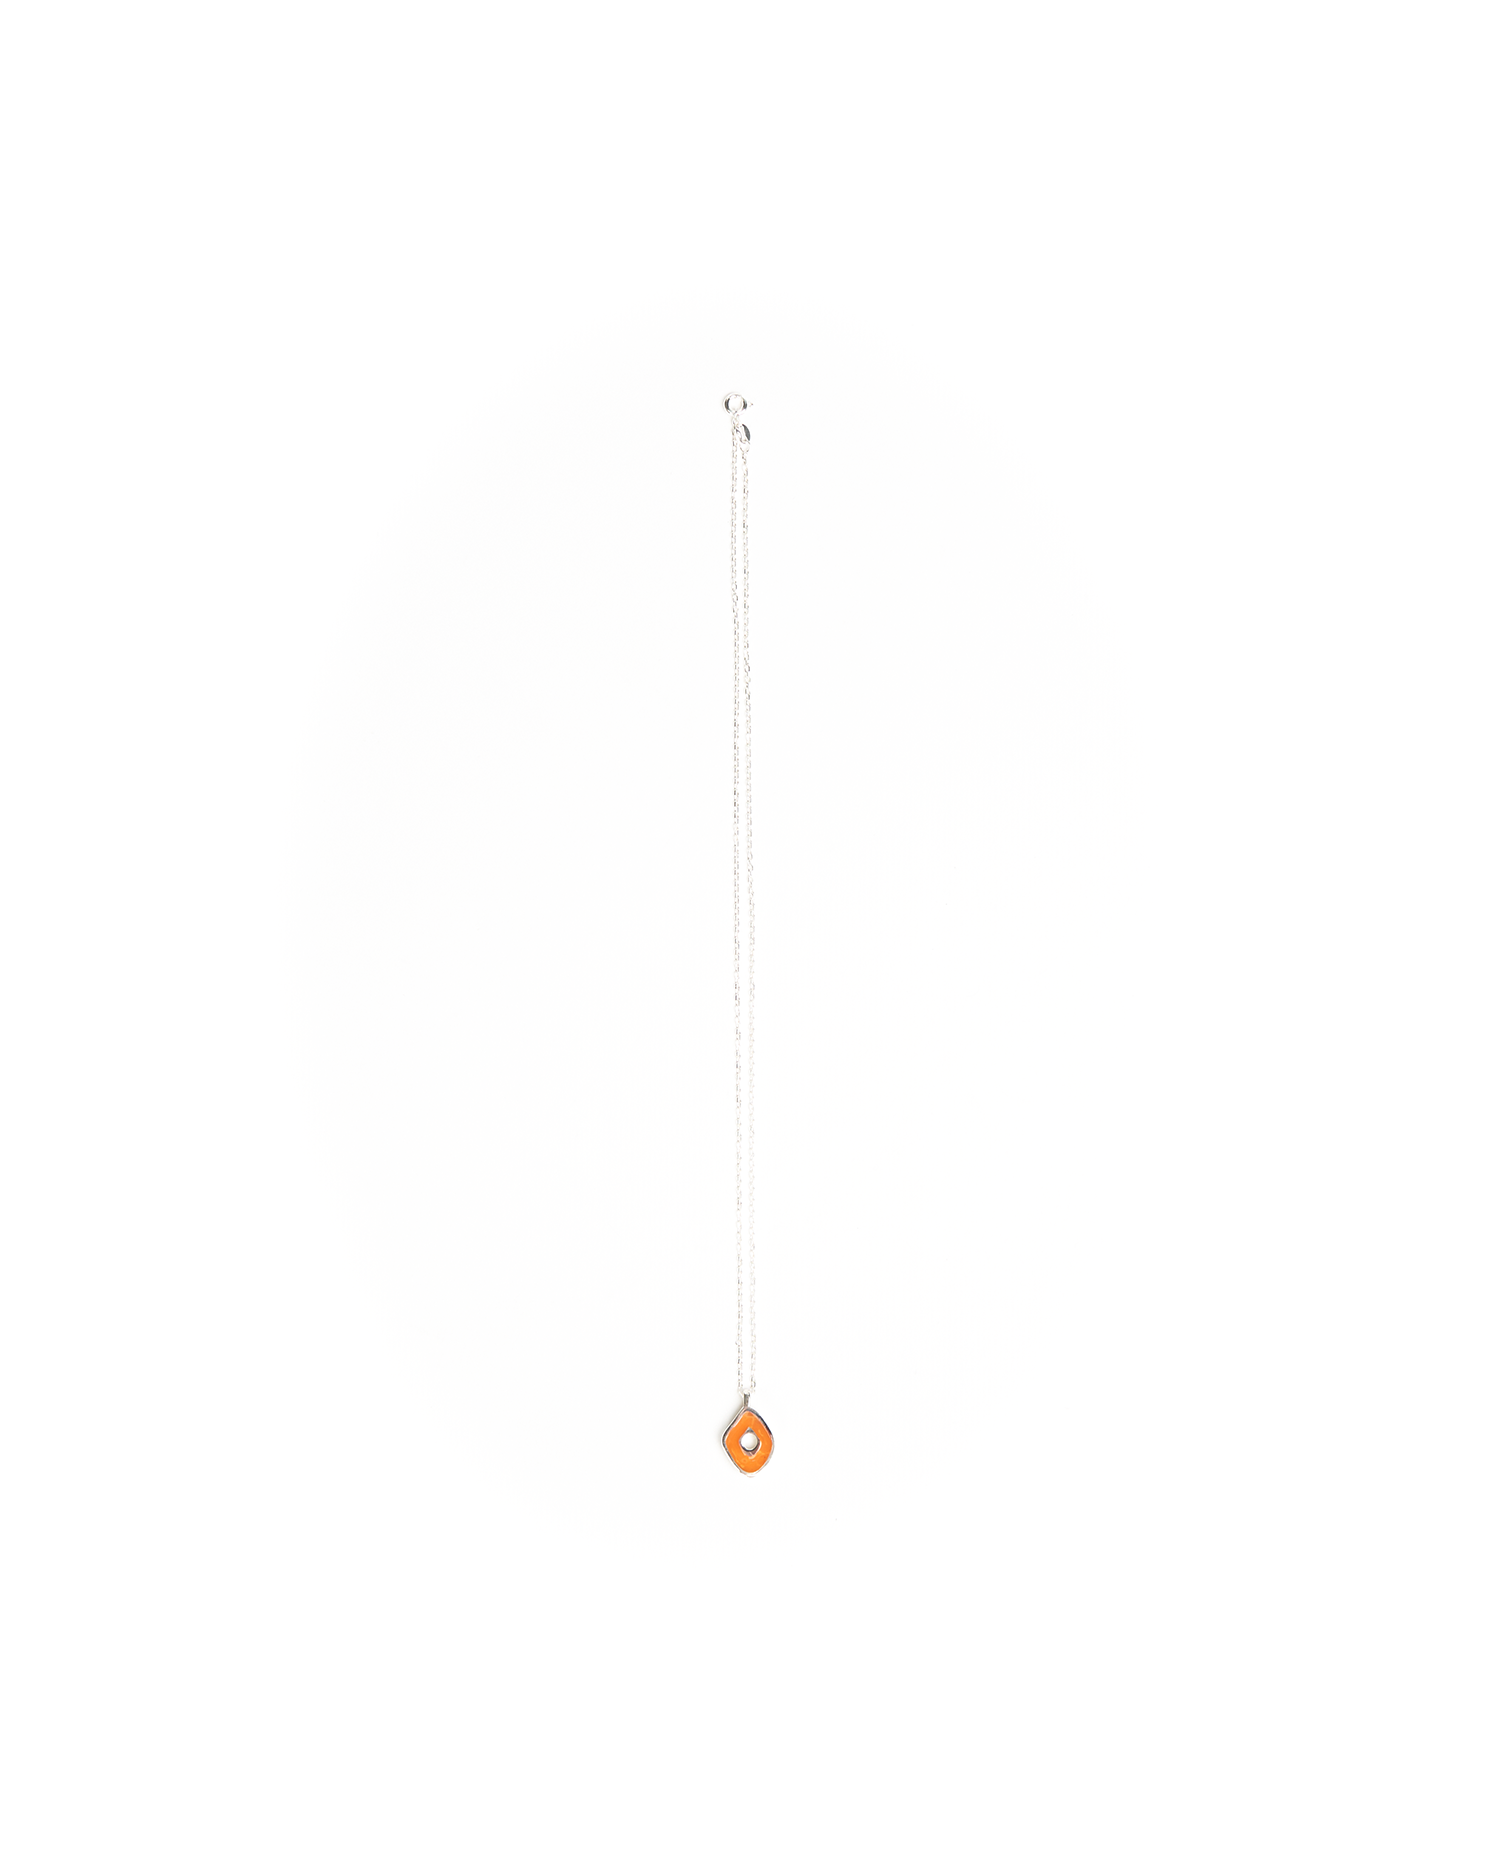 Irregular Pendant With Chain - 925 Sterling Silver / Orange Resin